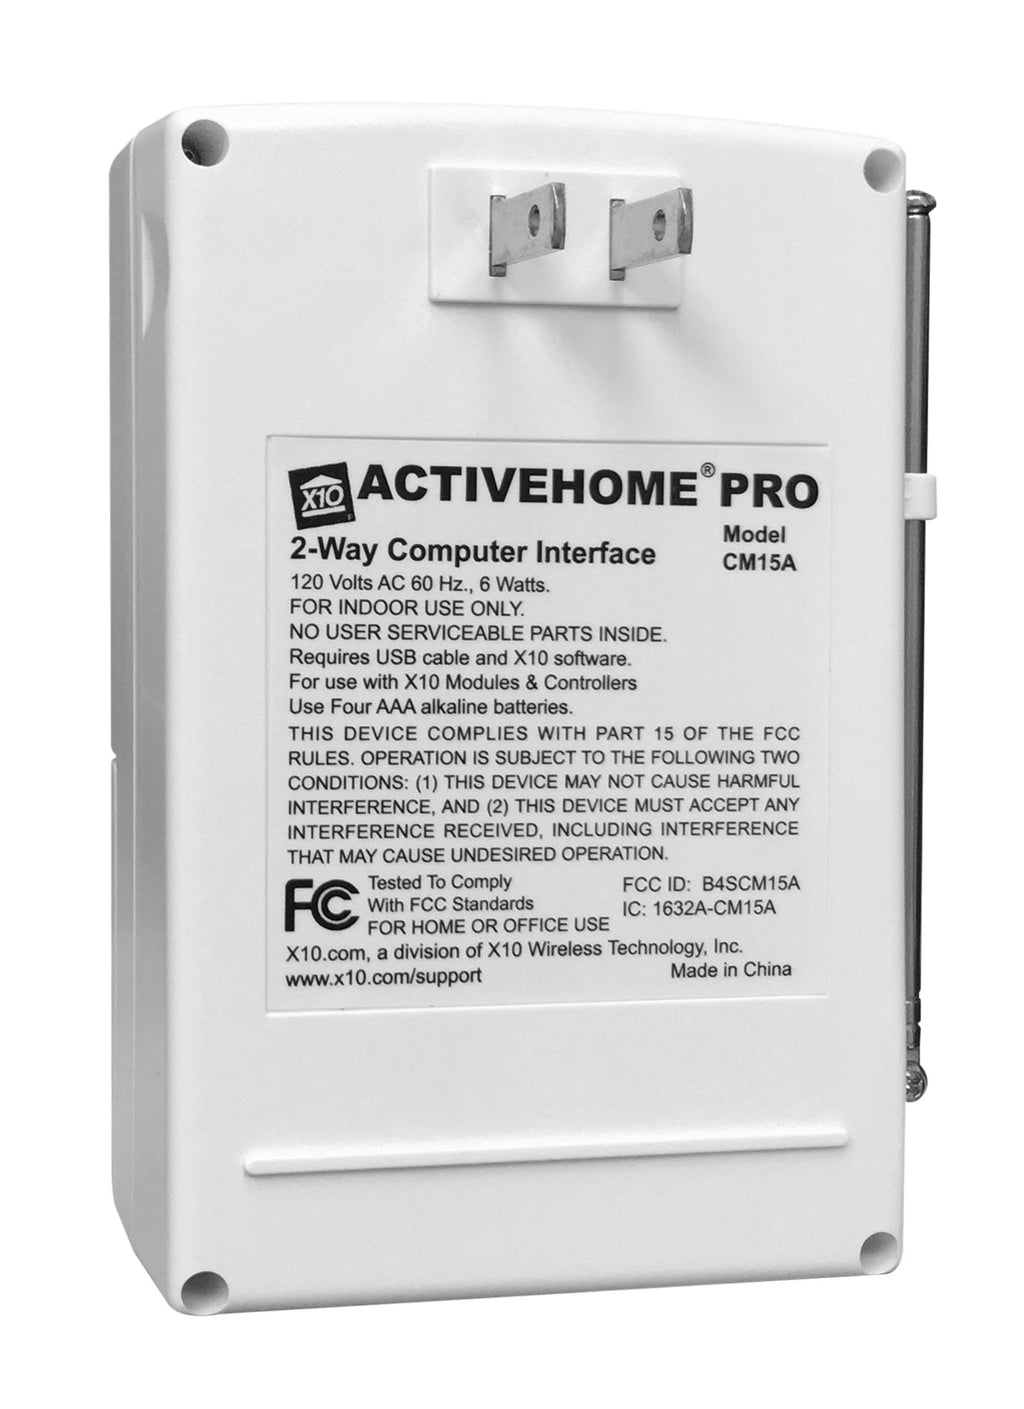 activehome pro